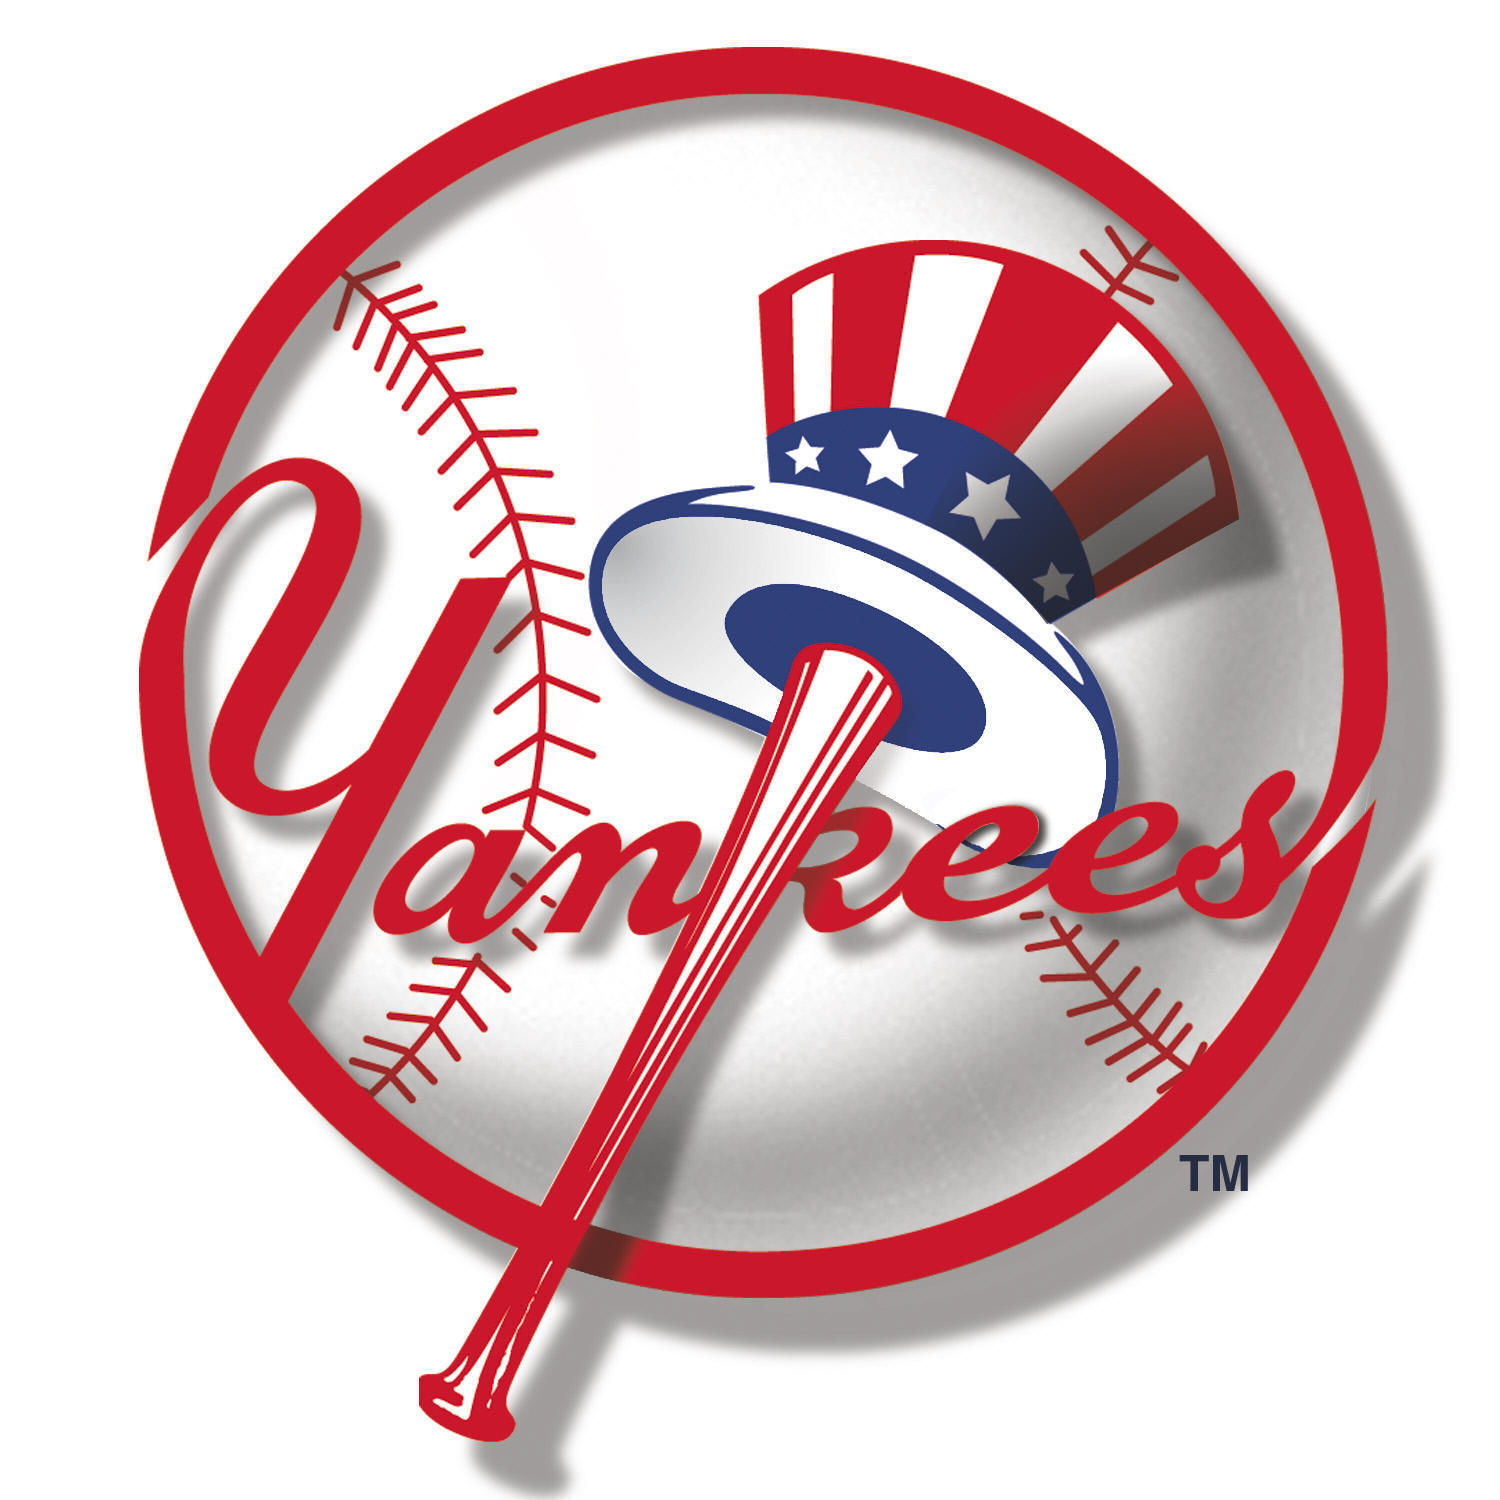 New York Yankees Backgrounds, Compatible - PC, Mobile, Gadgets| 1500x1500 px